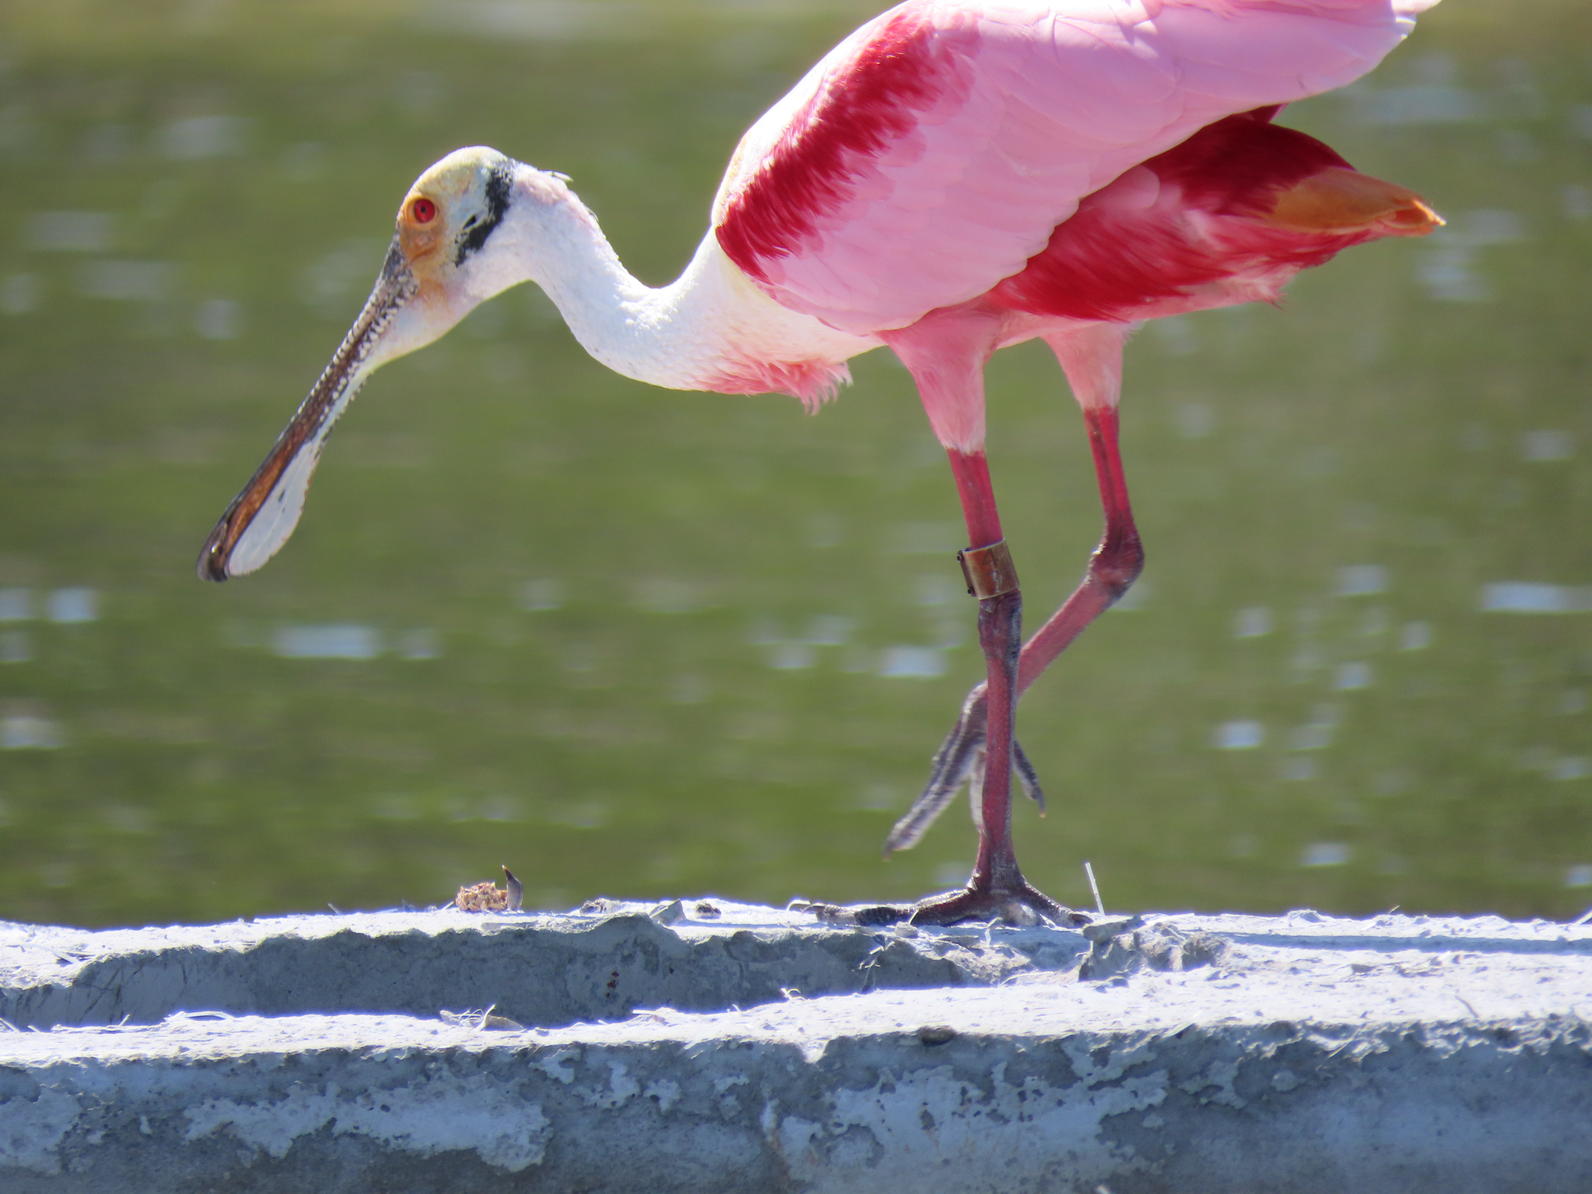 A Roseate Spoonbill spotted at Alafia.